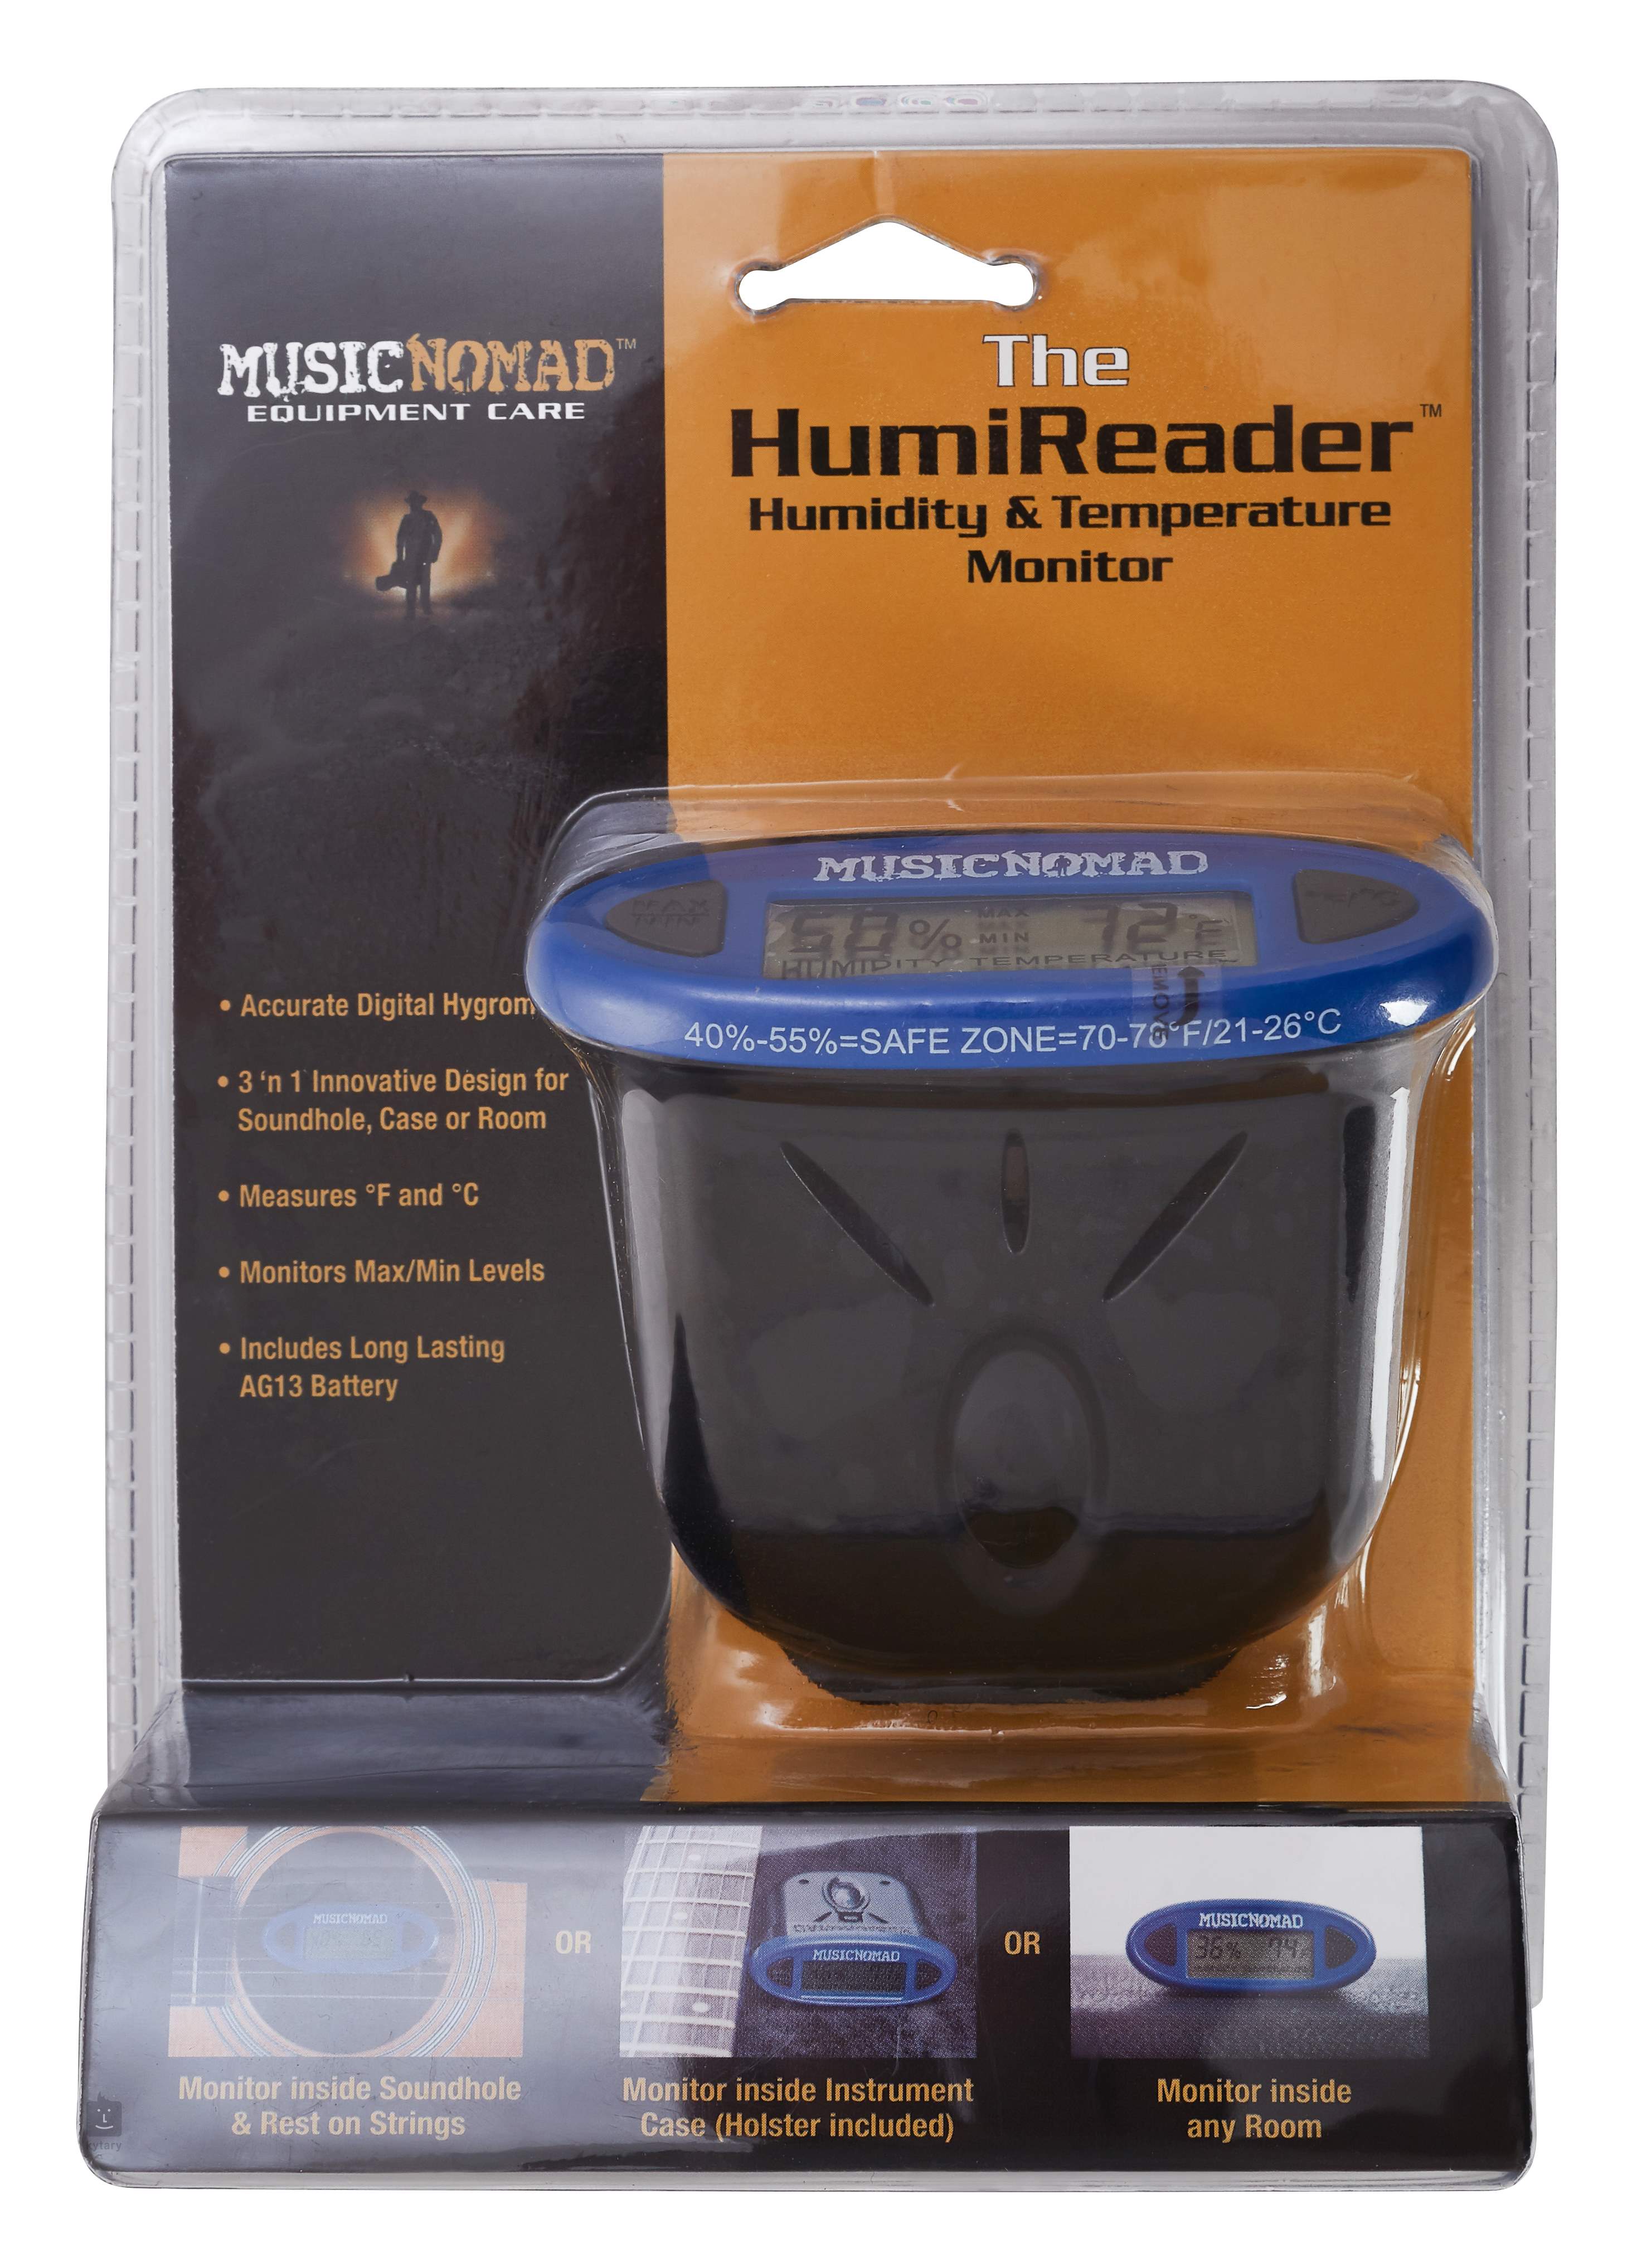 Music Nomad Premium Humidity Care System - Humidifier & Reader